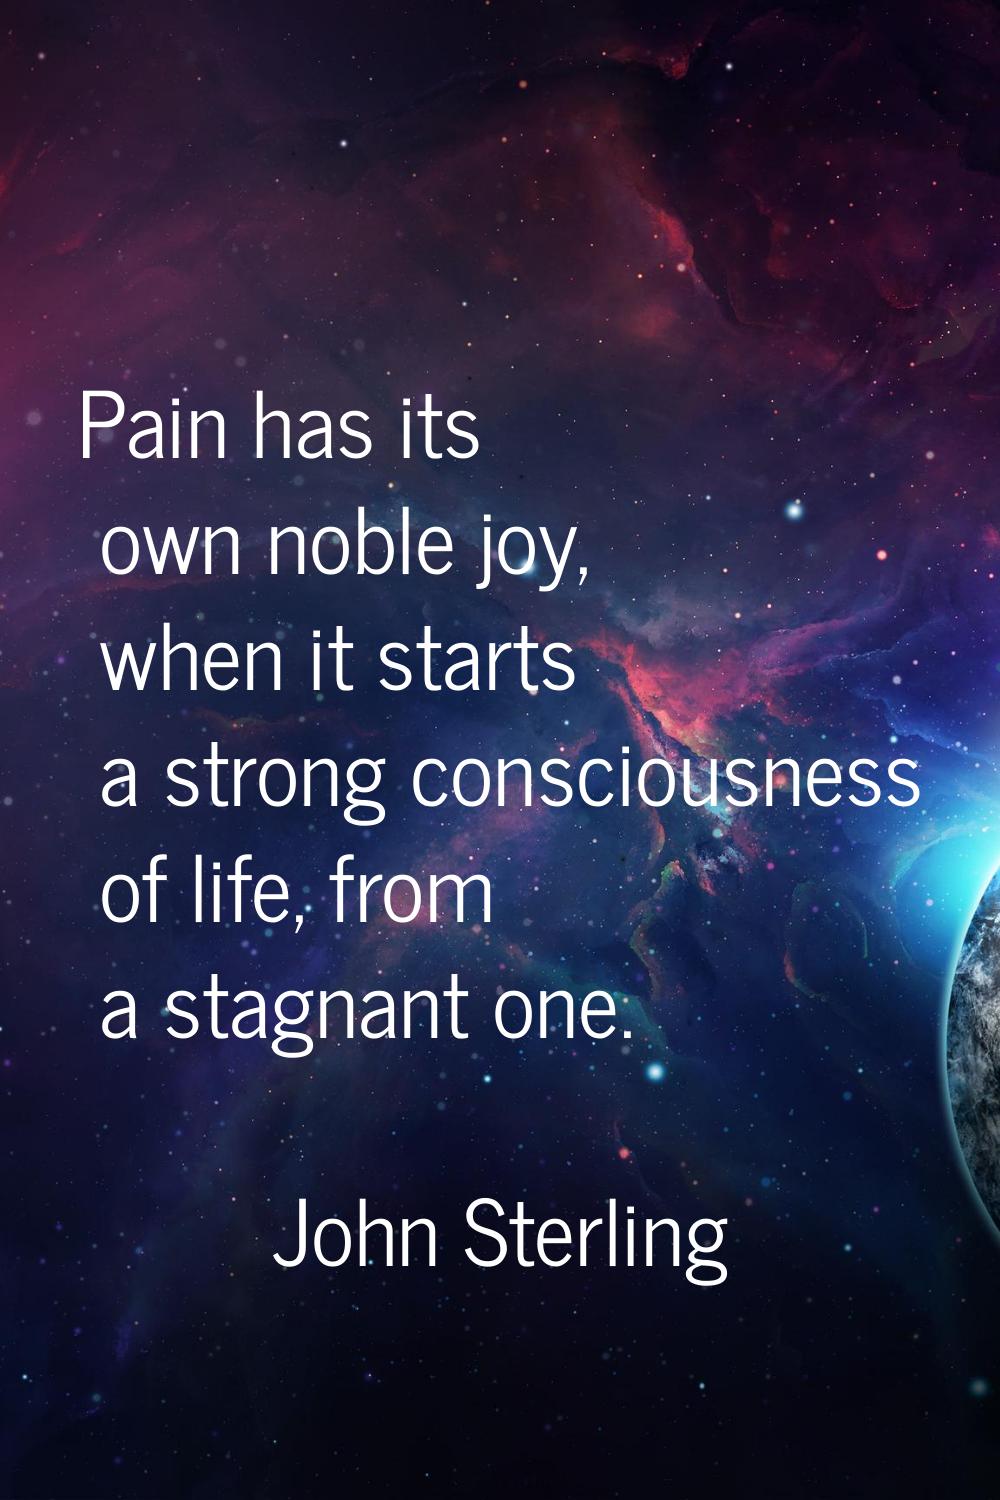 Pain has its own noble joy, when it starts a strong consciousness of life, from a stagnant one.